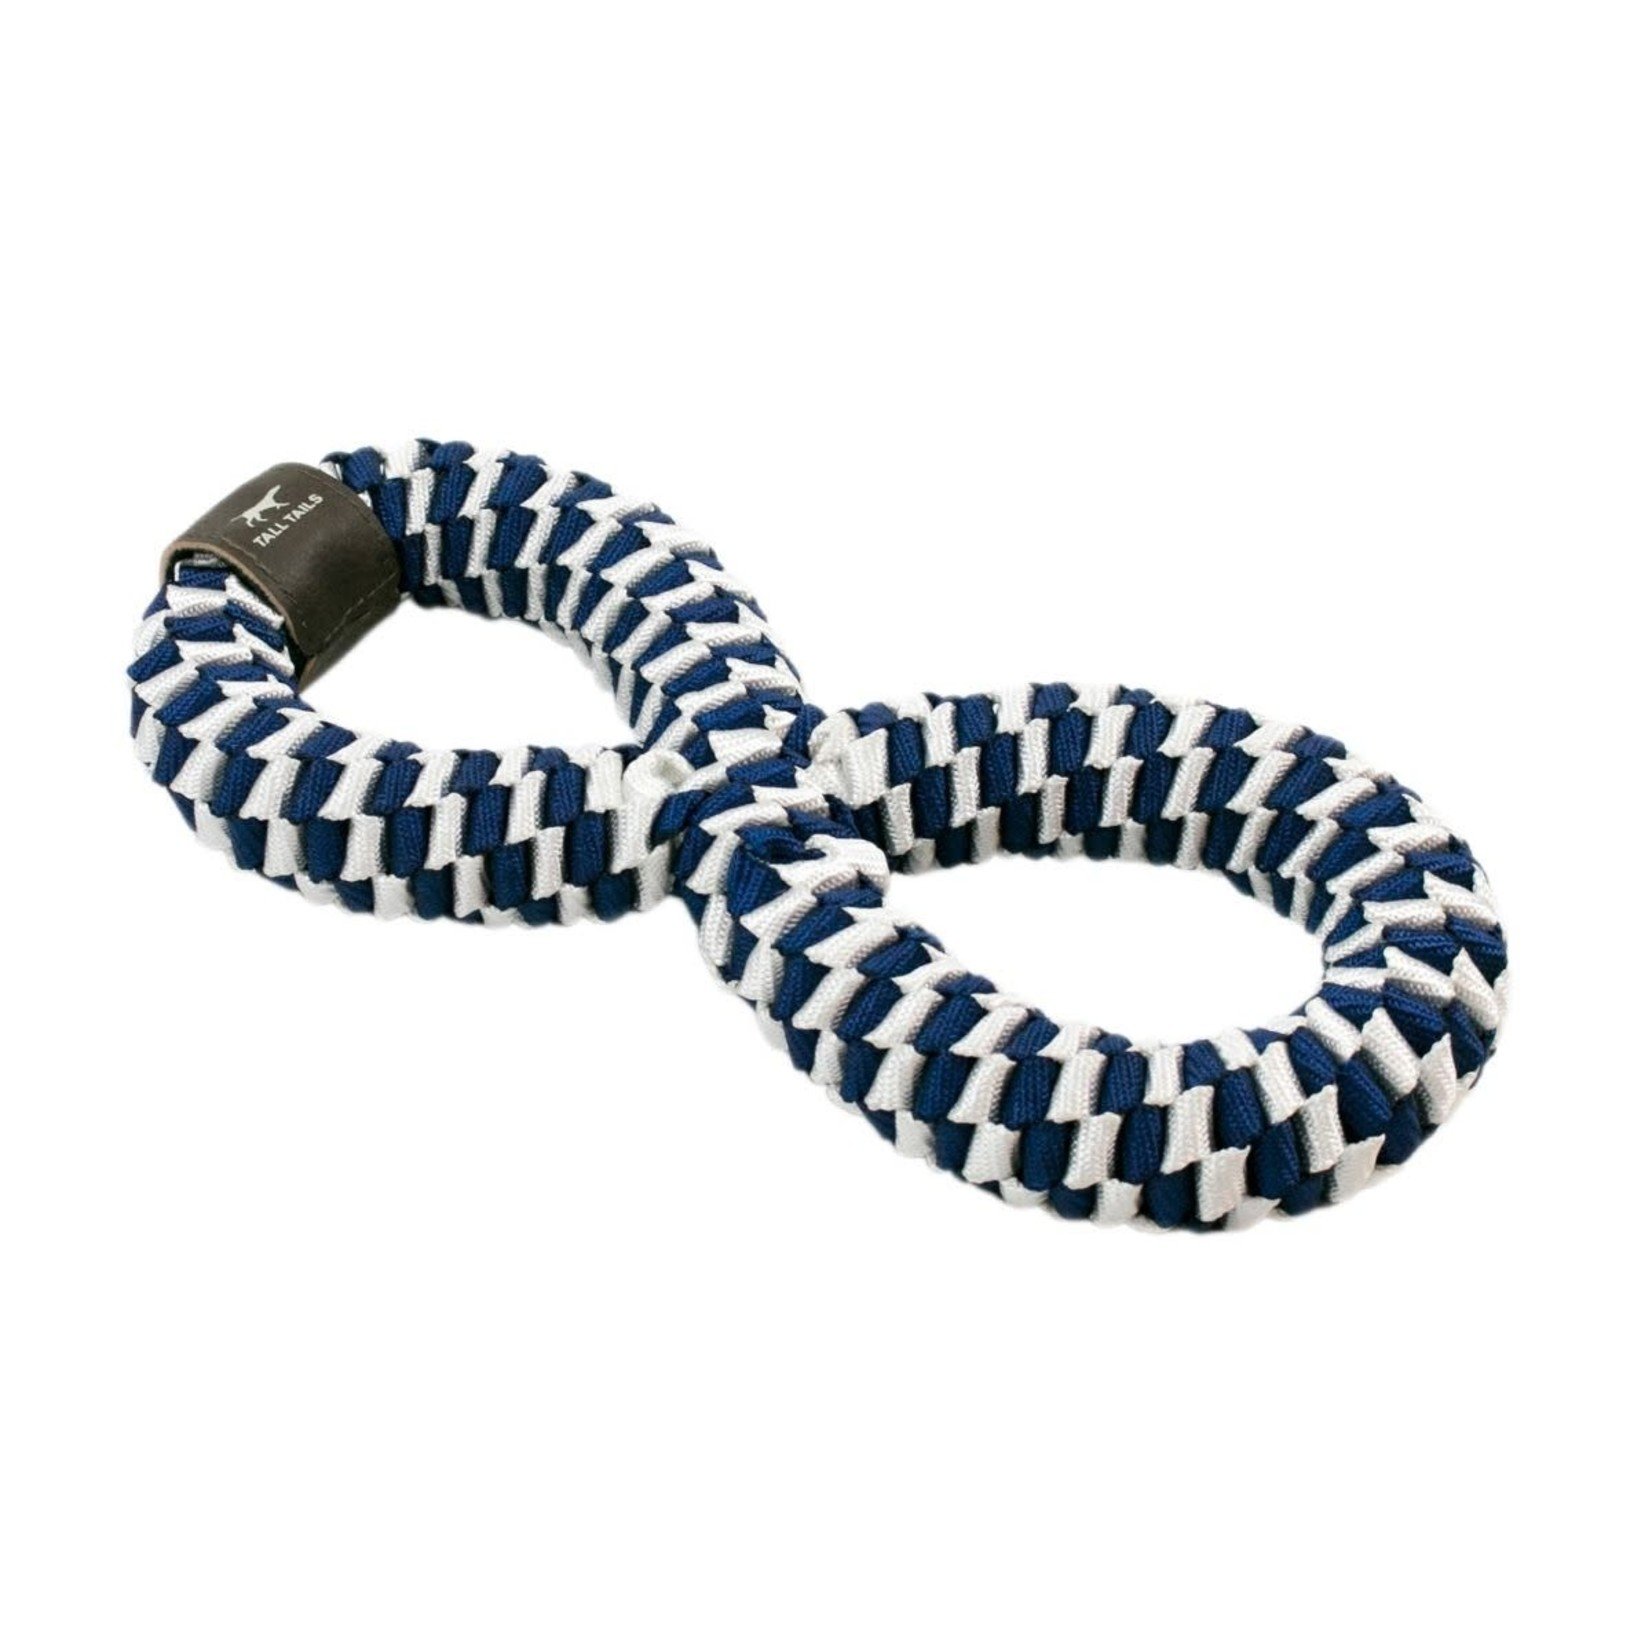 Tall Tails Tall Tails Braided Infinity Tug Navy